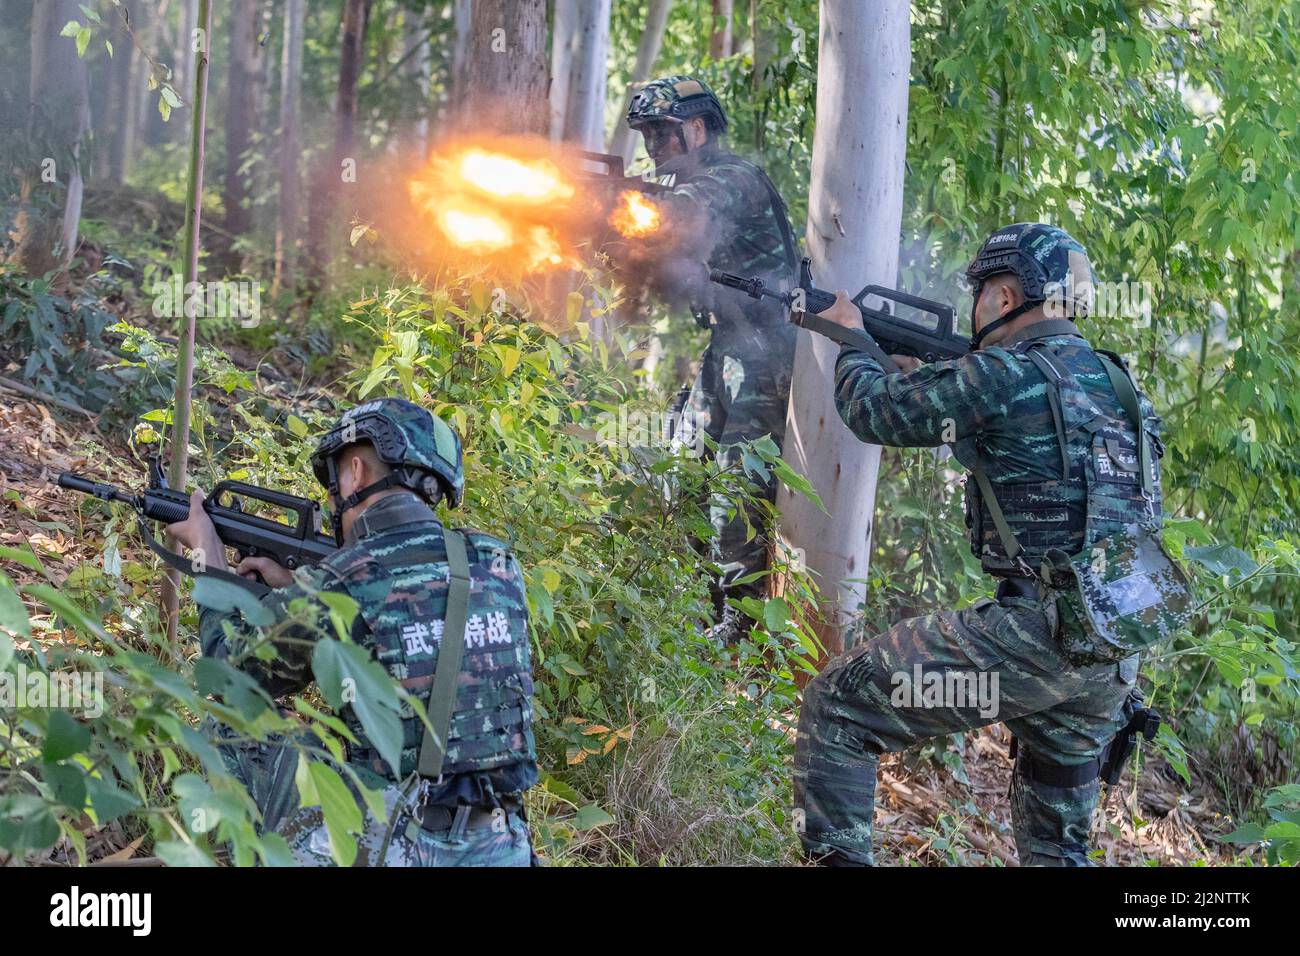 NANNING, CHINA - APRIL 3, 2022 - Armed police carry out a comprehensive anti-terrorism drill in Nanning, South China's Guangxi Zhuang Autonomous Regio Stock Photo